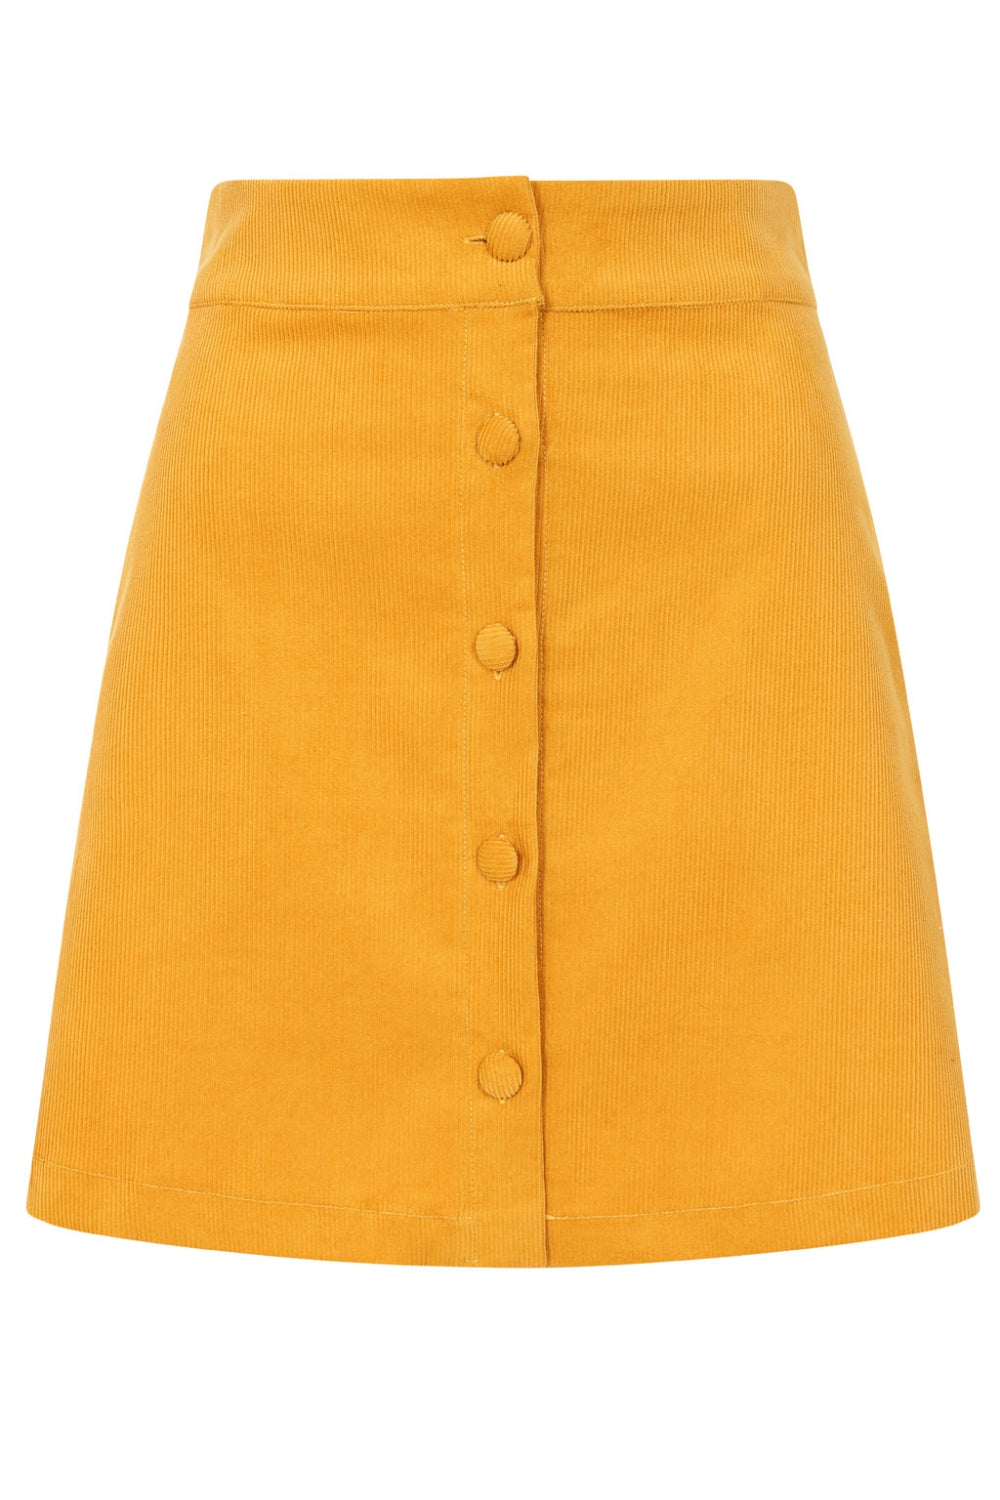 mustard corduroy button-front full a-line skirt in an above the knee length with side seam pockets. Shown from front